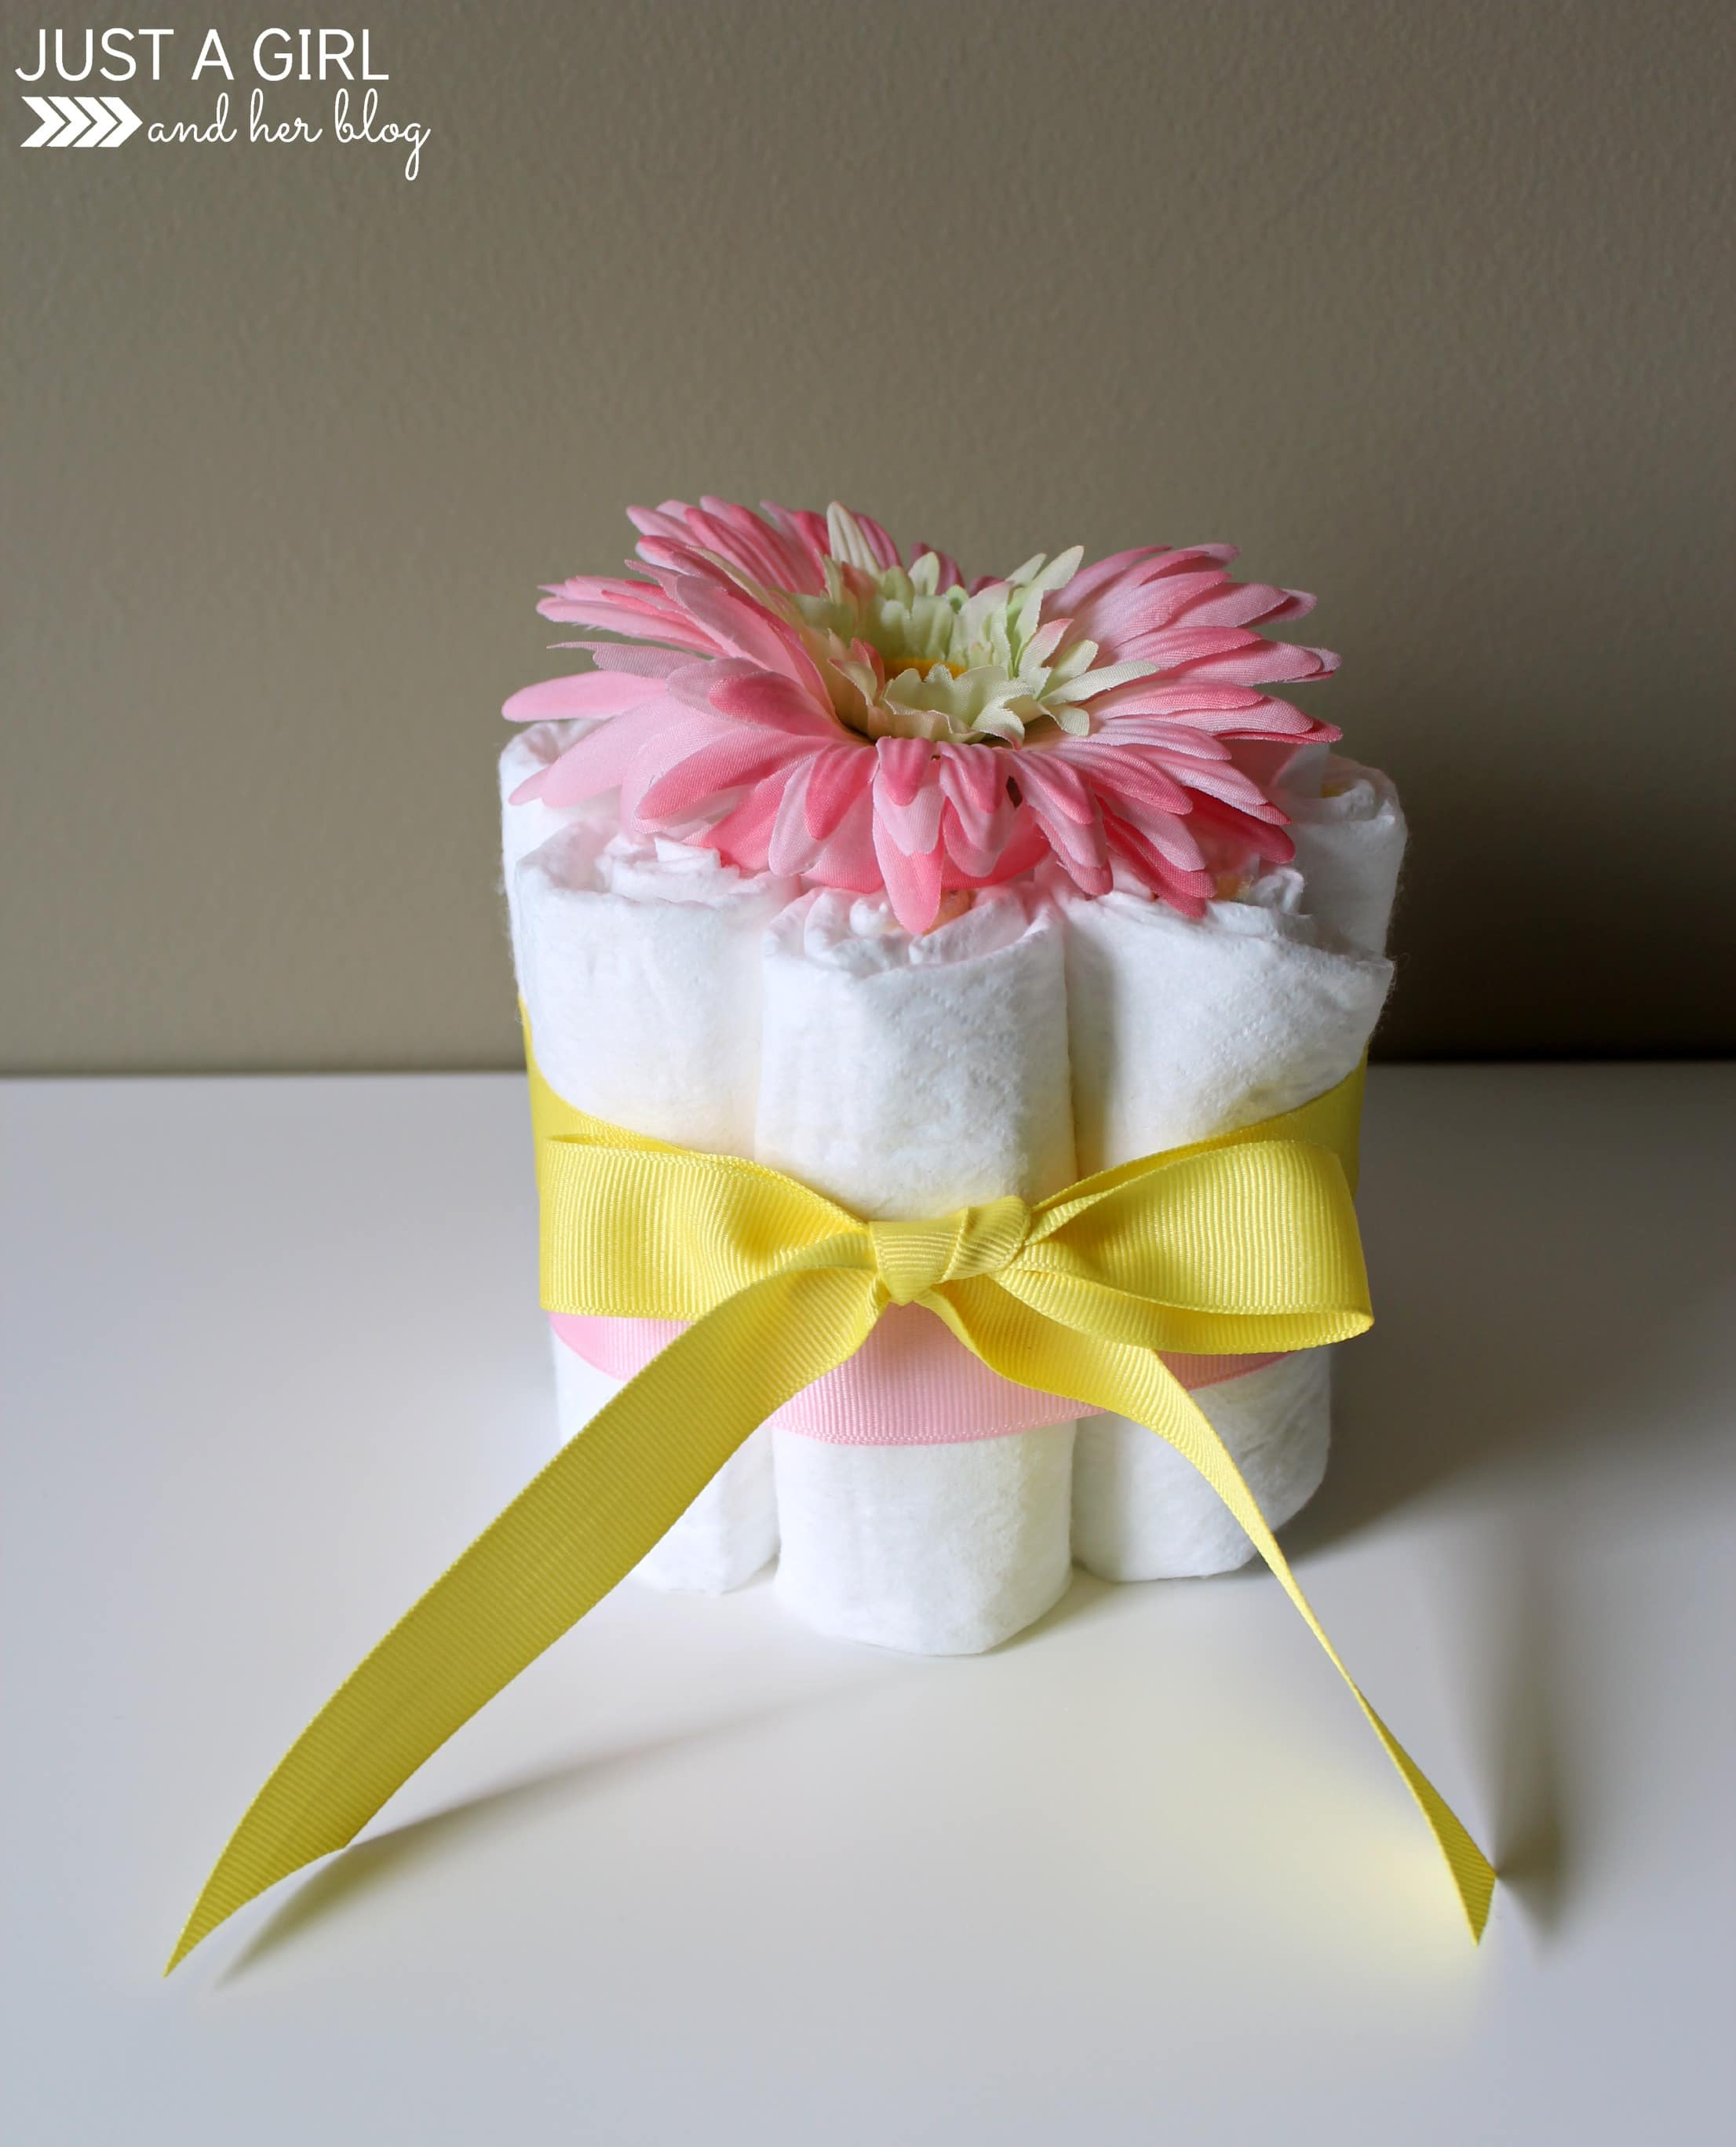 DIY Baby Shower Centerpieces For Girls
 Sweet and Simple Baby Shower Centerpieces